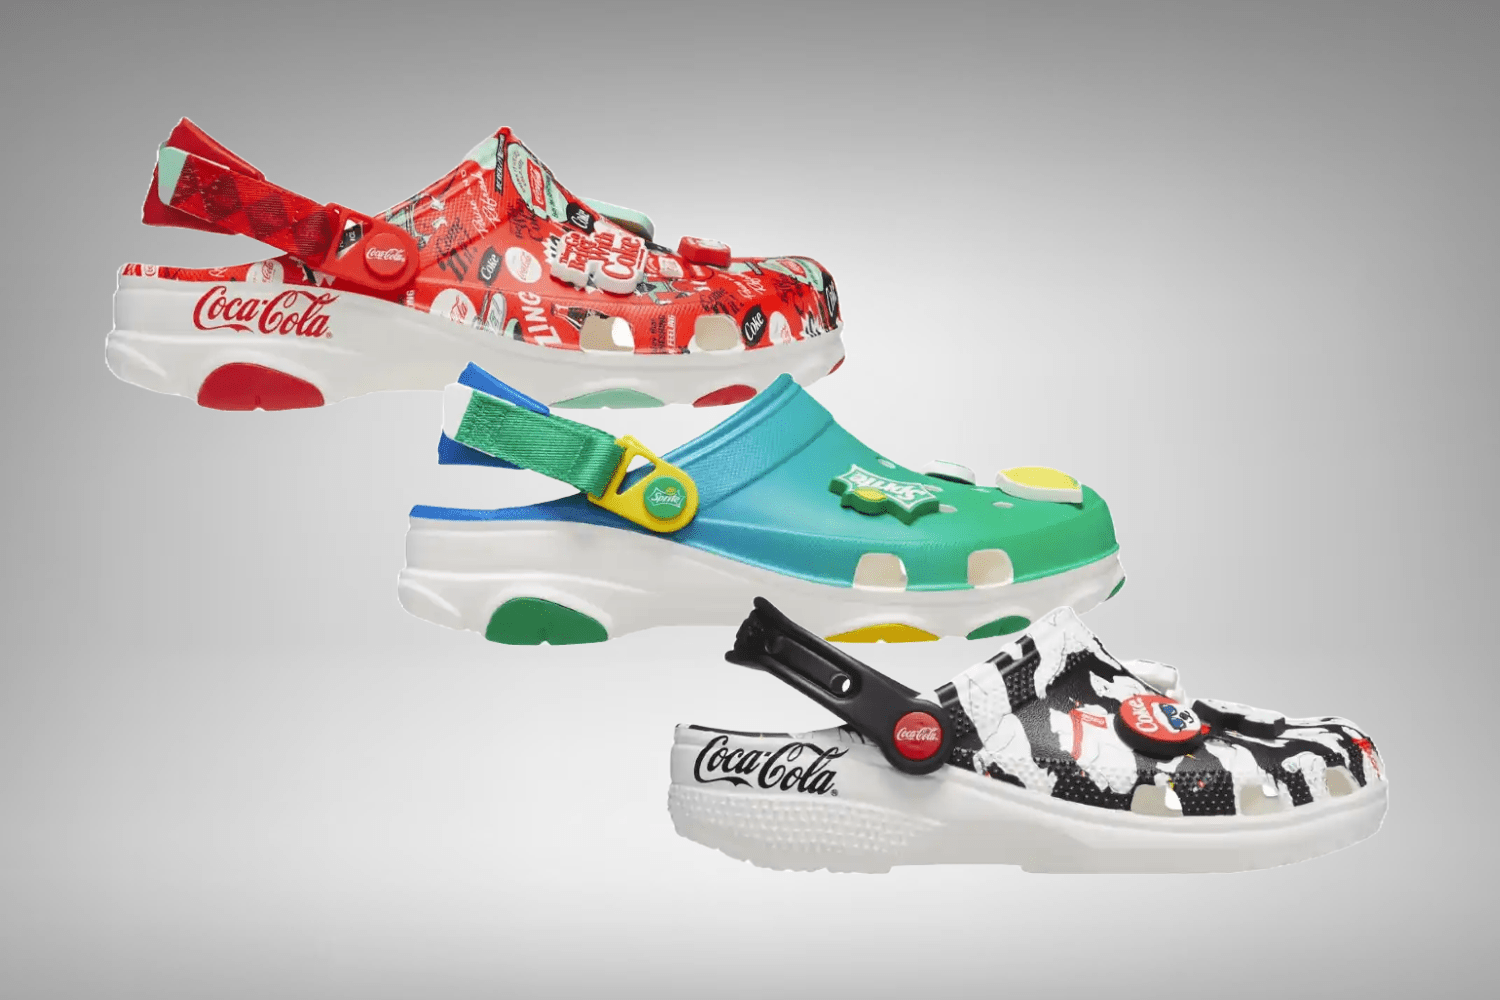 The Coca-Cola x Crocs Clog collection in detail